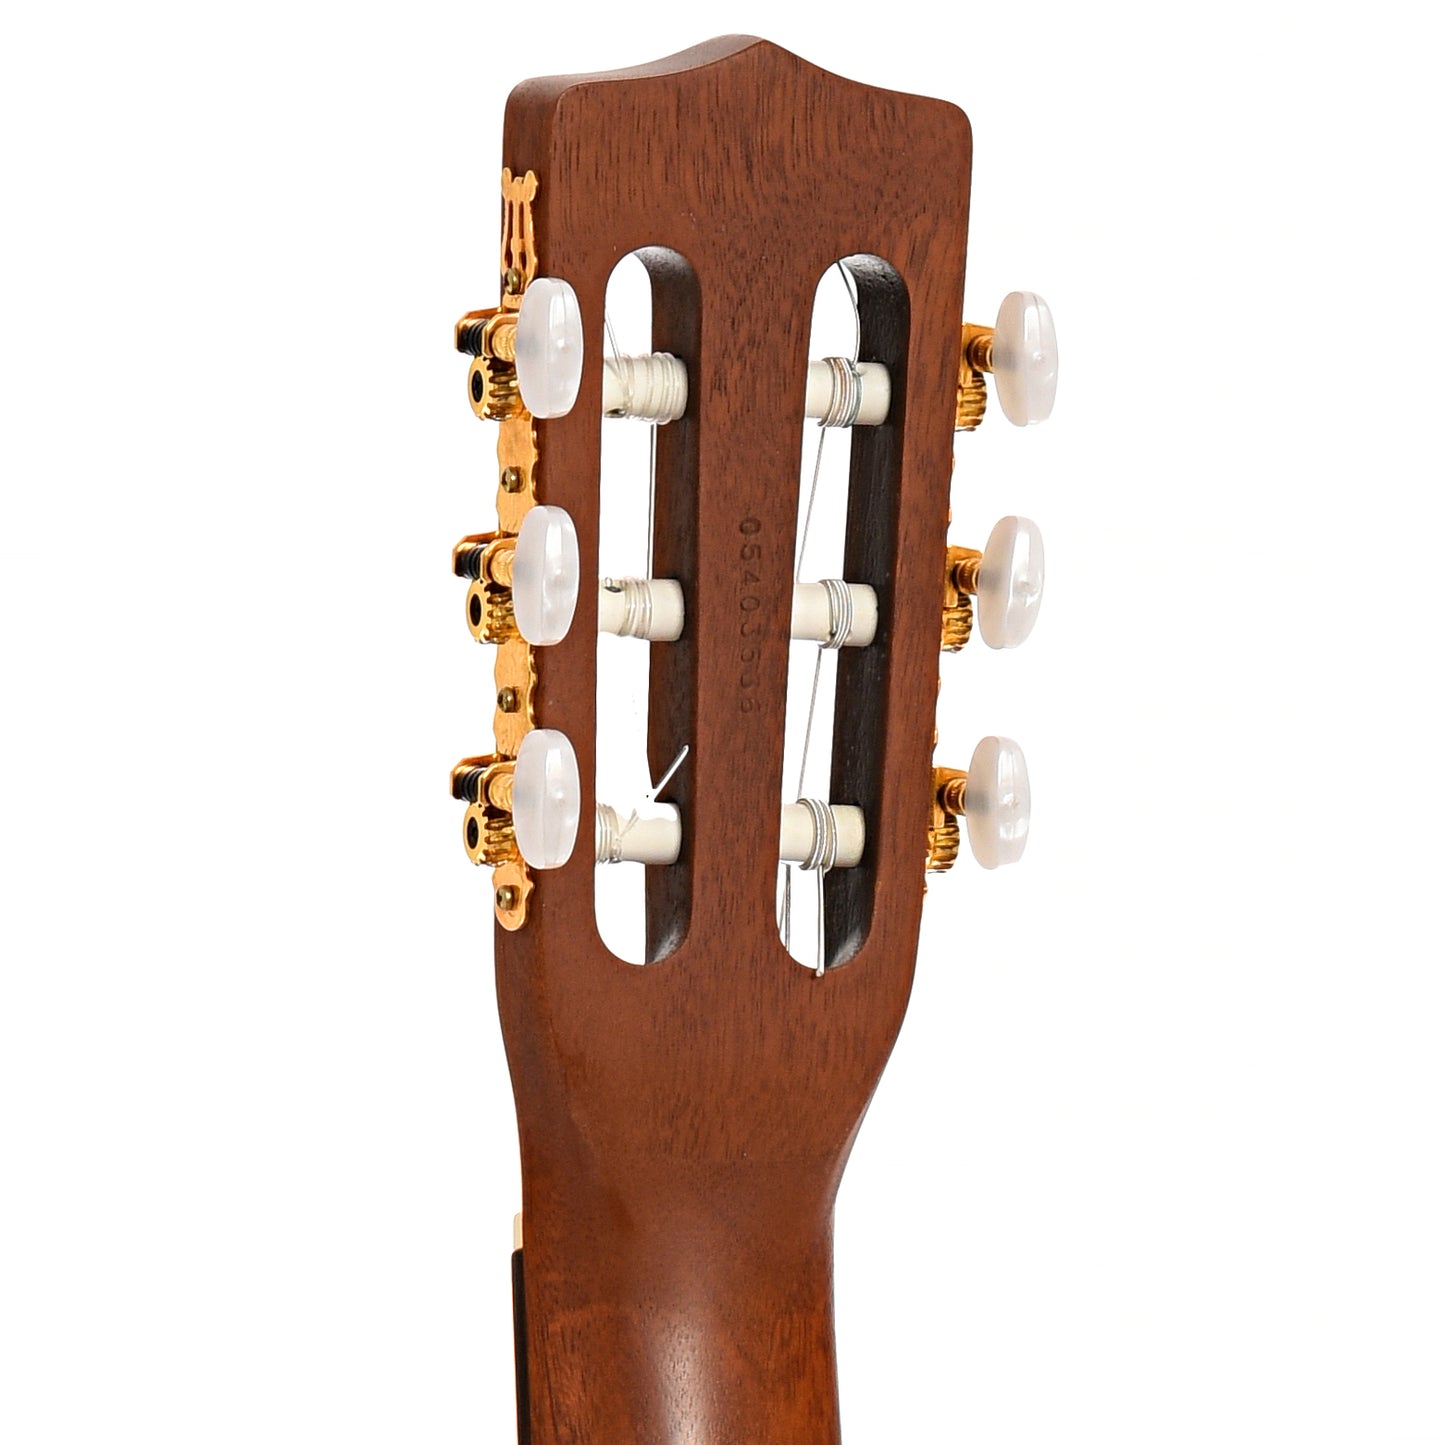 Back headstock of La Patrie CW Concert Classical